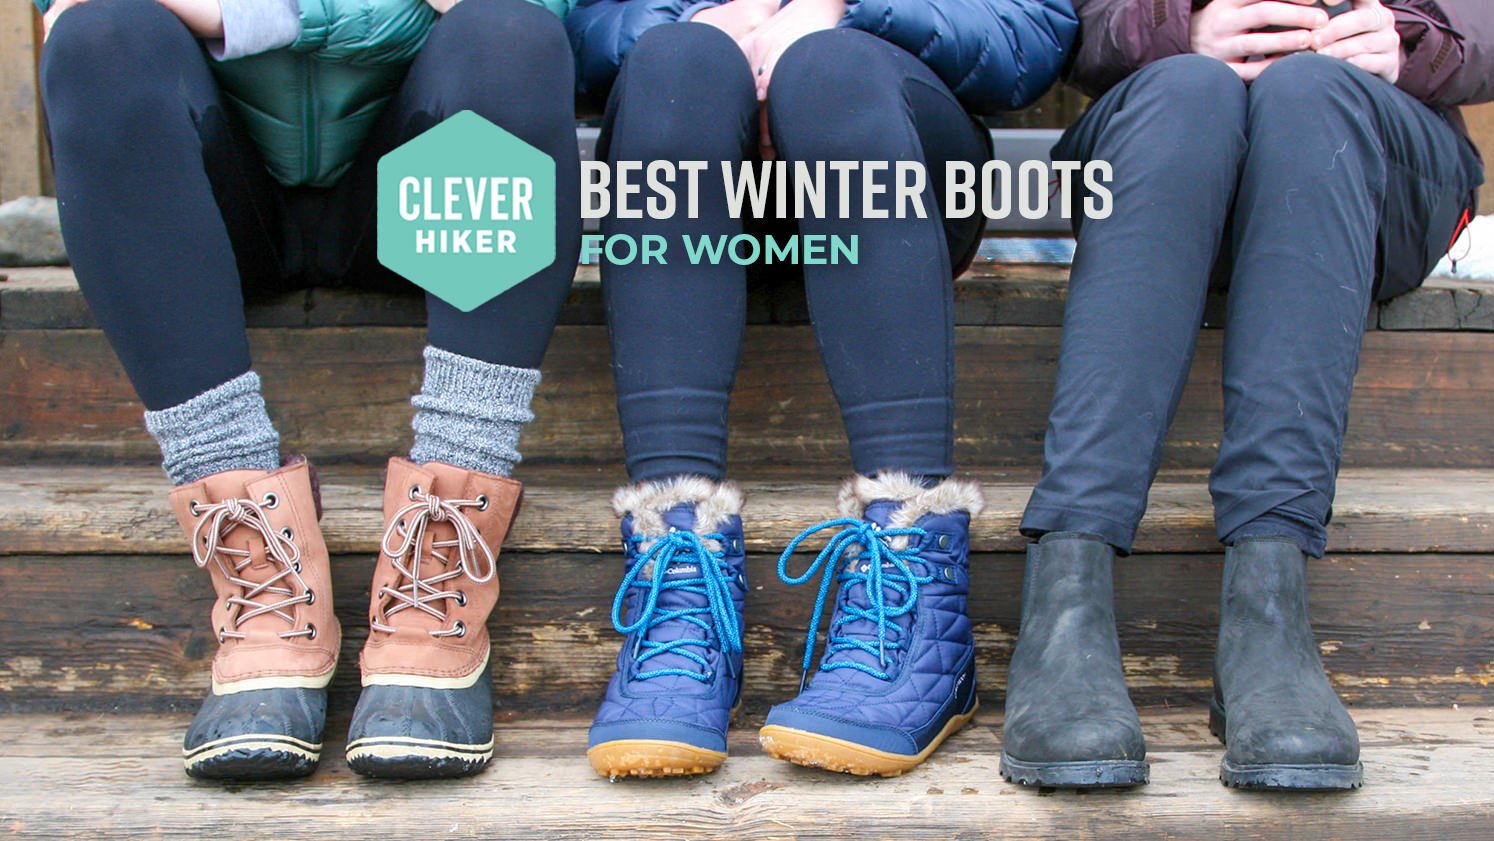 10 best winter hiking leggings ( we tested several) for men and women   Winter shoes for women, Boots and leggings, Womens winter fashion outfits